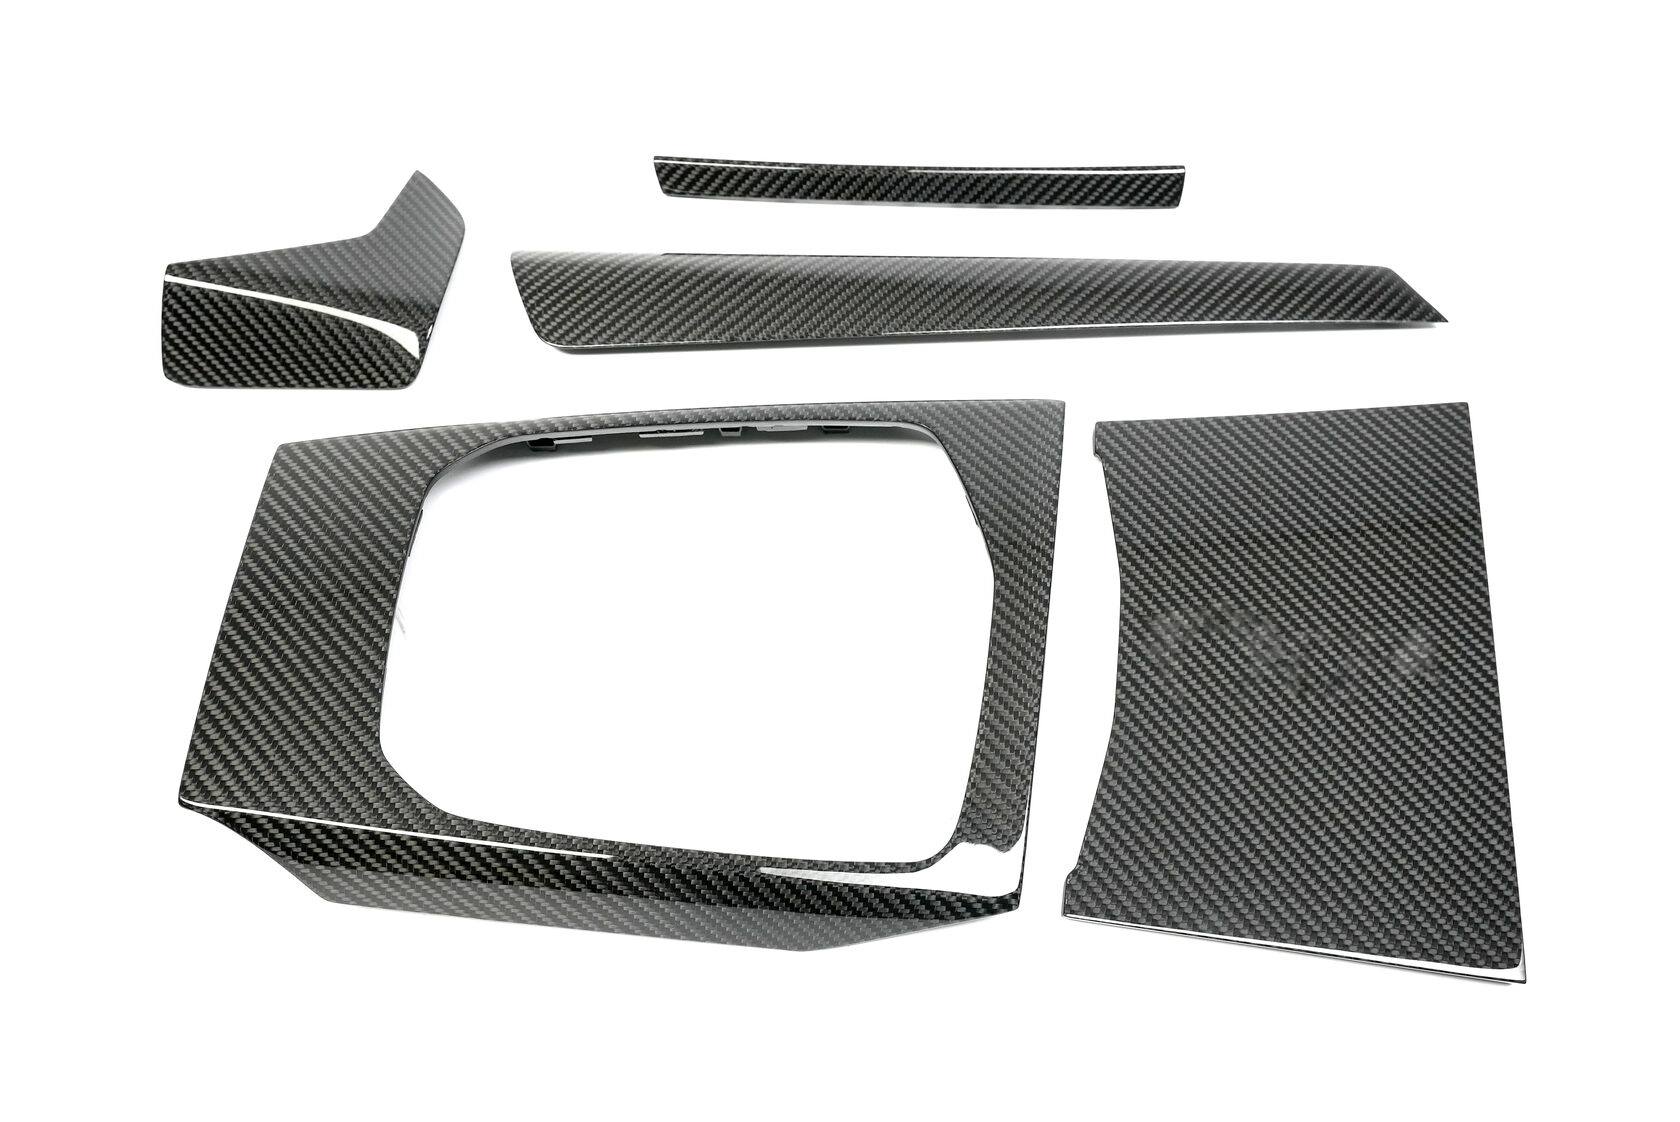 Interior panels Sport Tech Carbon for BMW 3 series G20